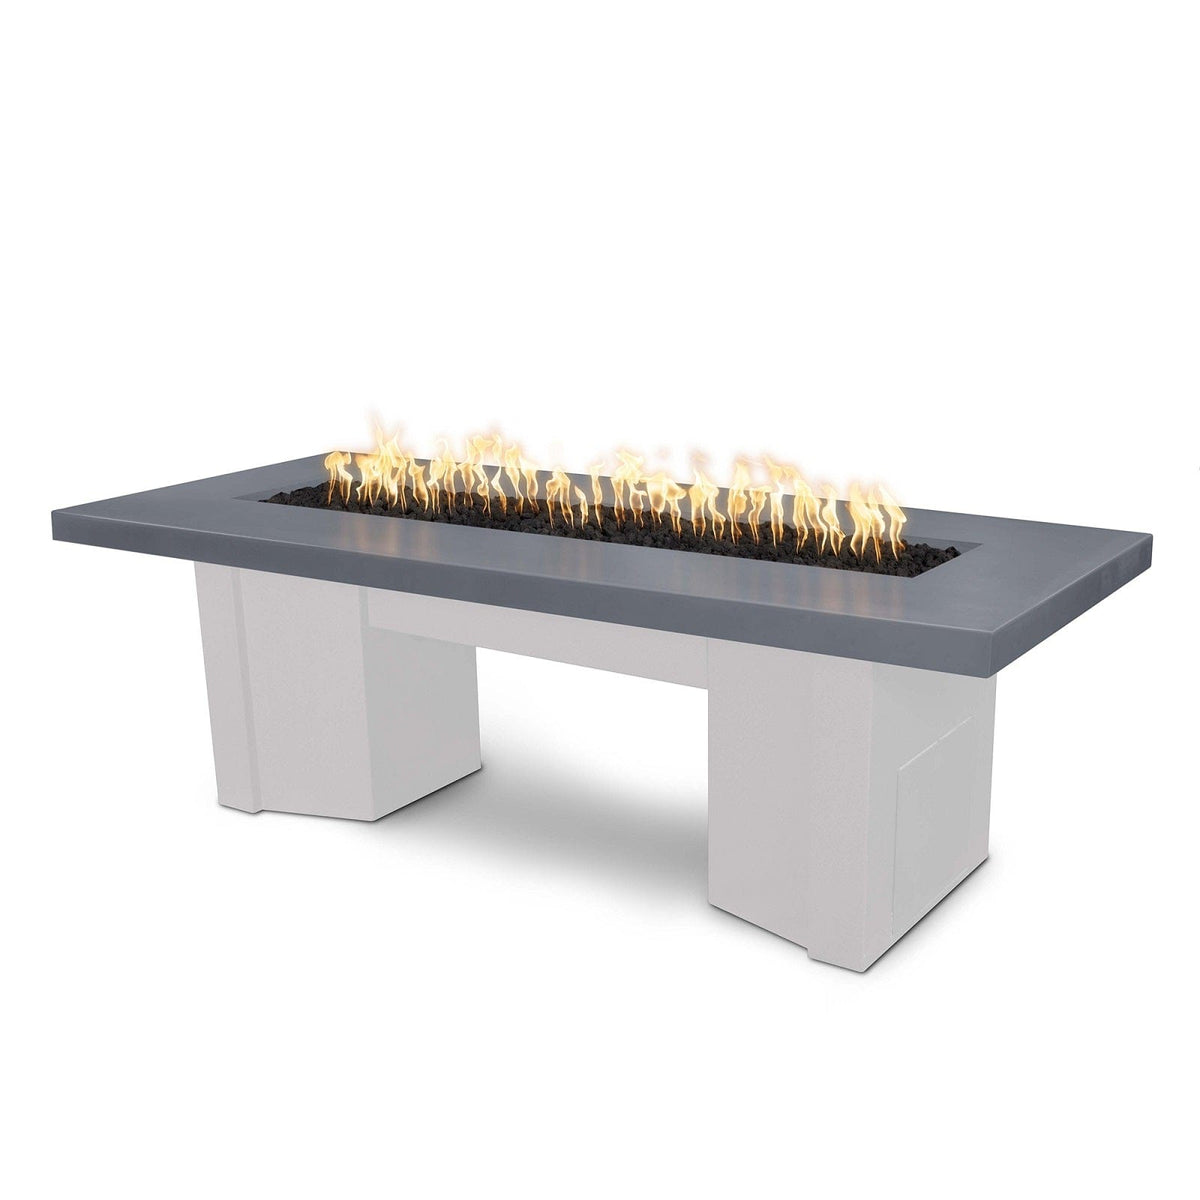 The Outdoor Plus Fire Features Gray (-GRY) / White Powder Coated Steel (-WHT) The Outdoor Plus 78&quot; Alameda Fire Table Smooth Concrete in Liquid Propane - Flame Sense System with Push Button Spark Igniter / OPT-ALMGFRC78FSEN-LP